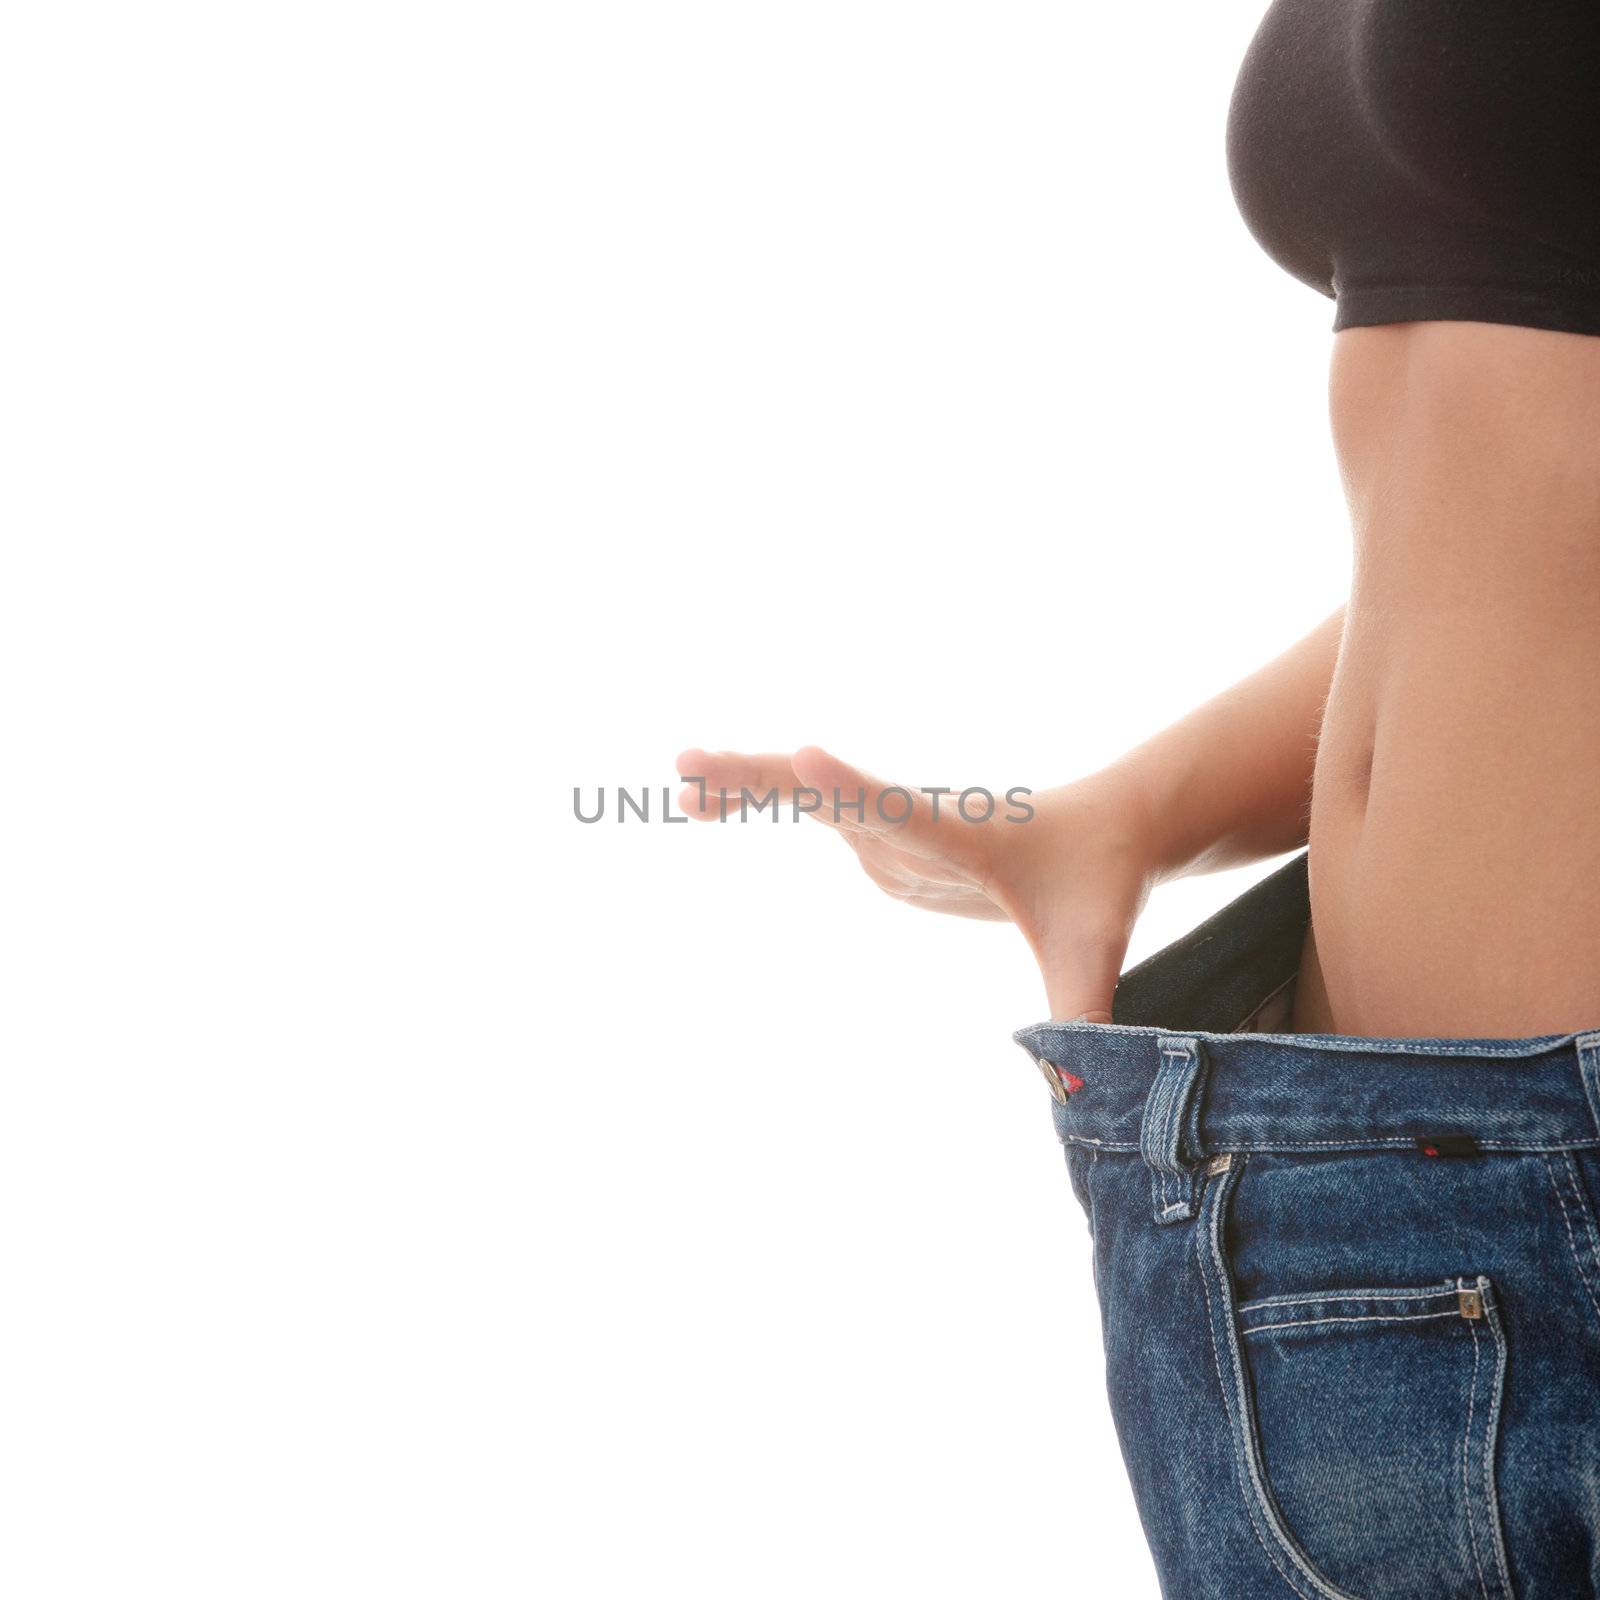 Woman showing how much weight she lost. Healthy lifestyles concept isolated on white background